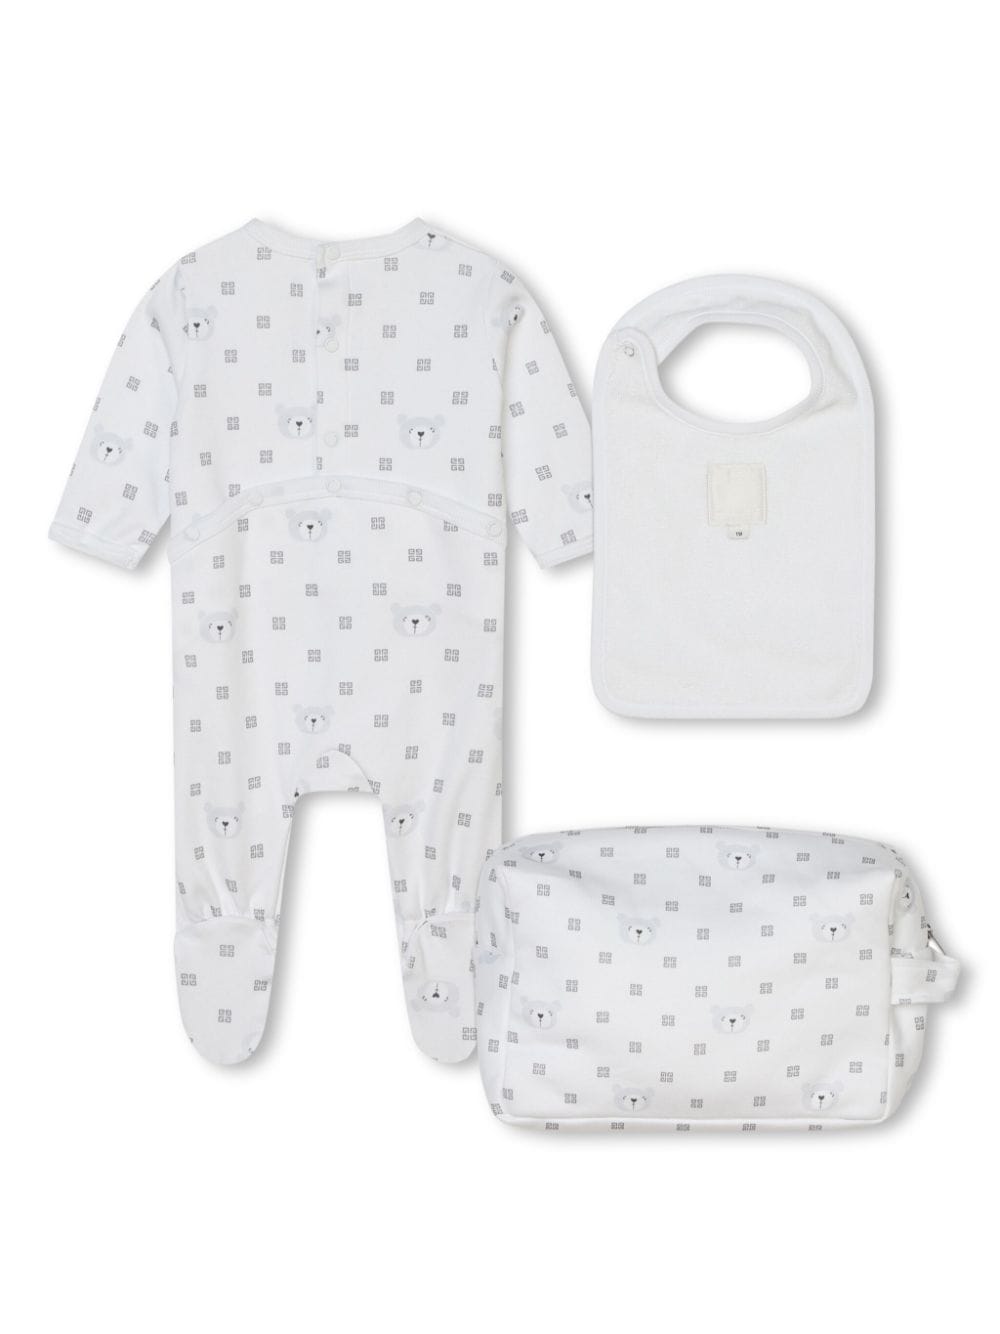 White baby onesie with print